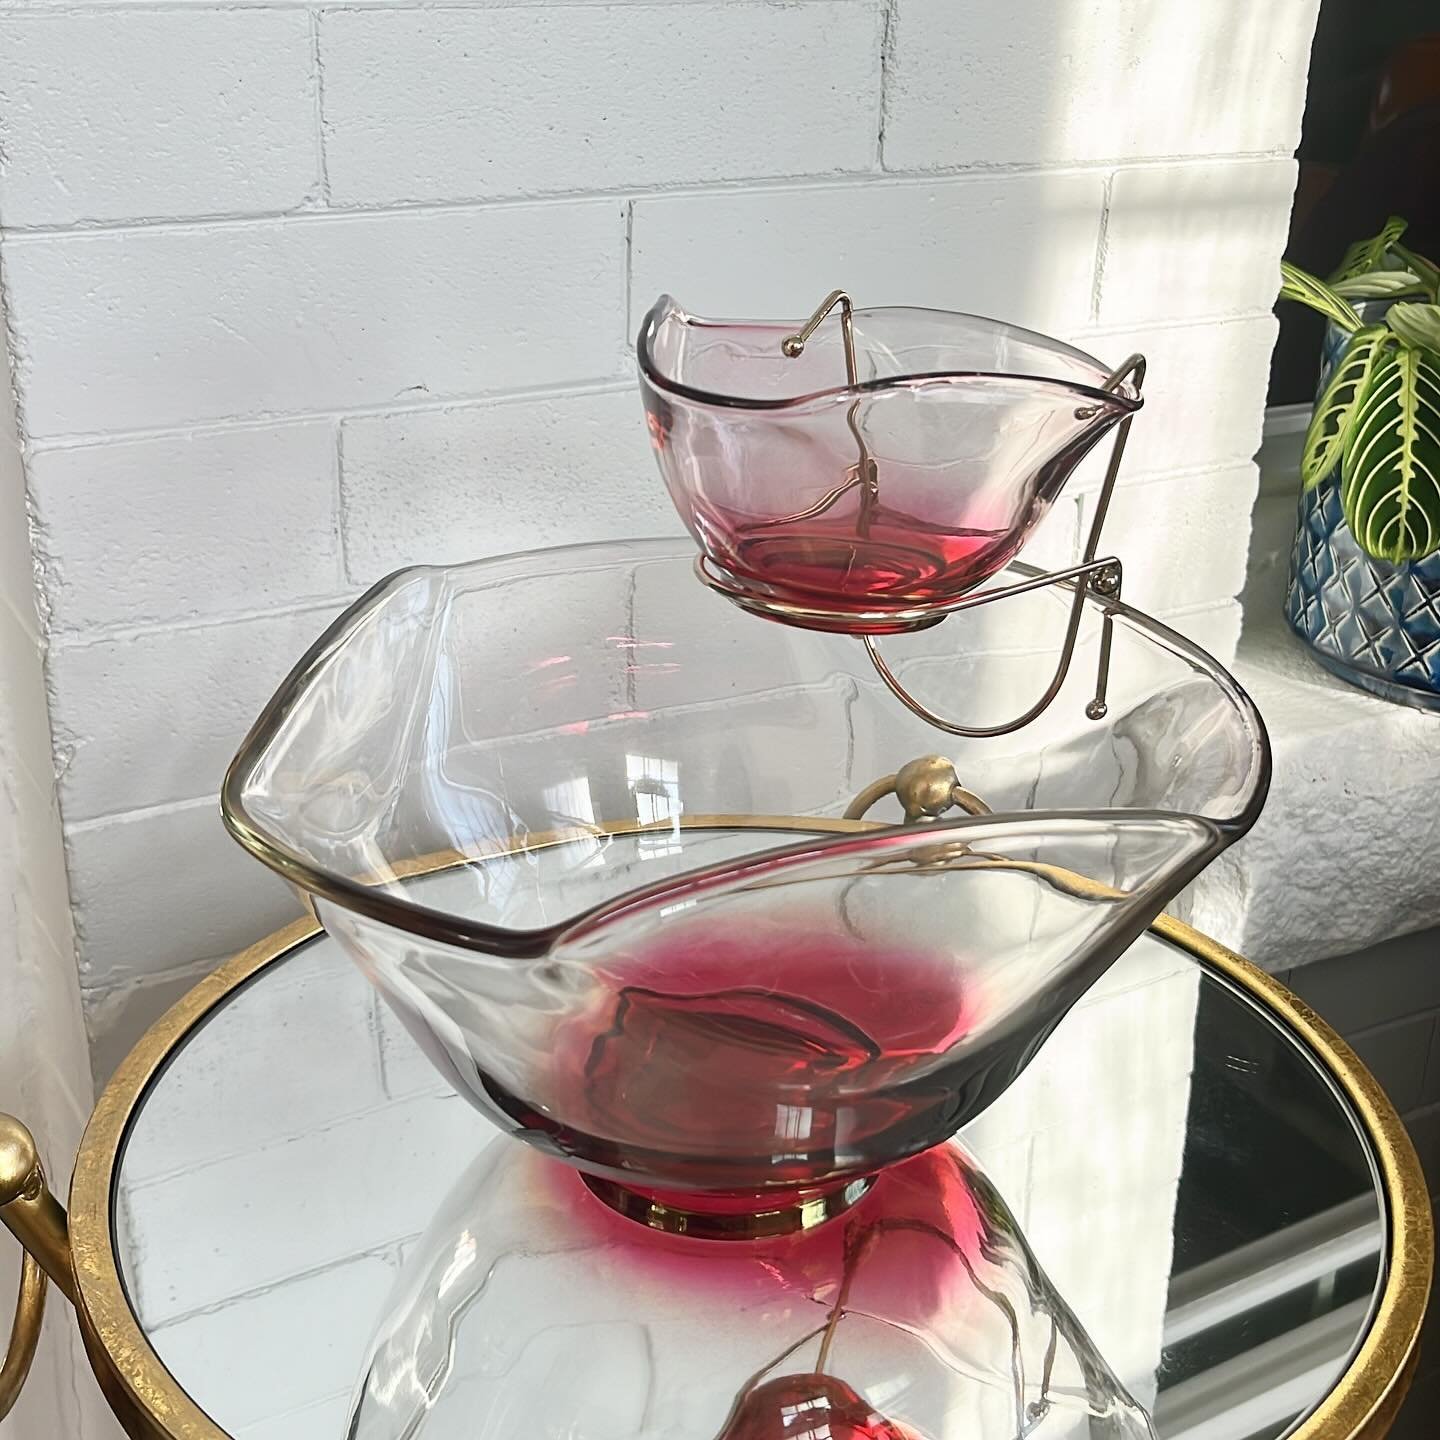 Hello lovely! Vintage Indiana Glass Ruby Modern Chip &amp; Dip Salad Set (with Original Box!) 💗 Available for $76. 

Vintage items are pre-owned and may show signs of age, love, and character.

- Comment SOLD on item or DM to purchase. 
- Venmo and 